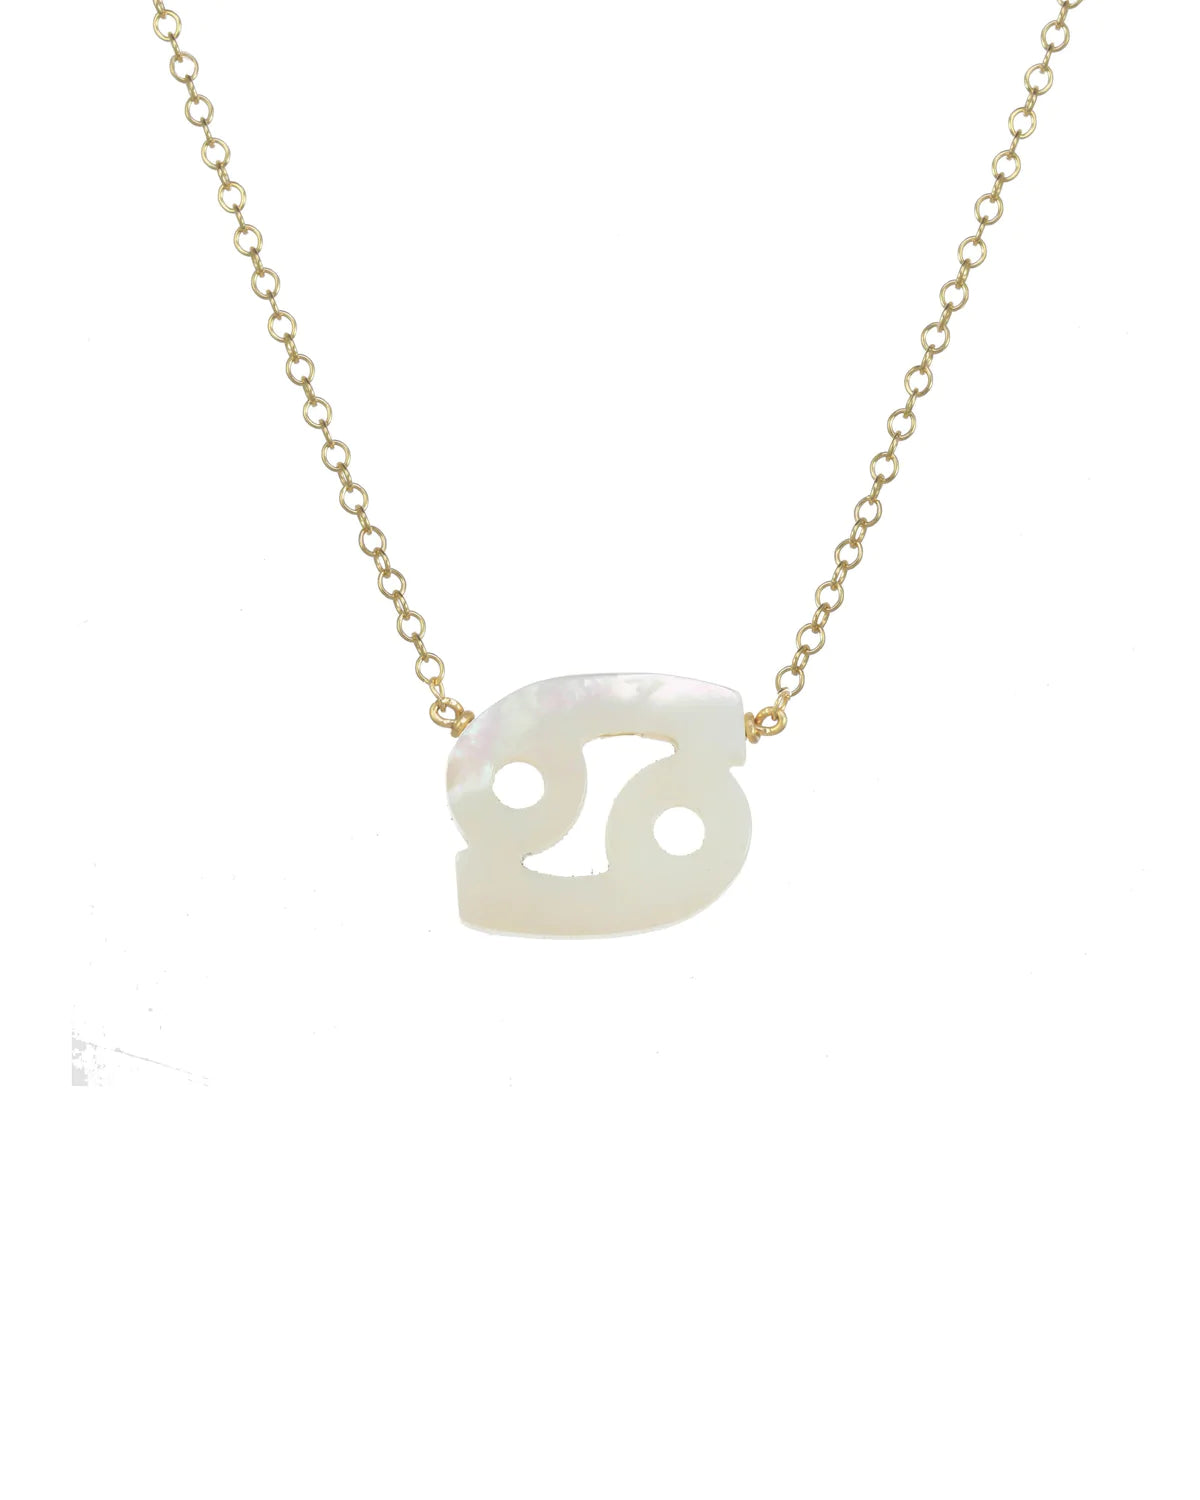 Cancer Necklace in MOP/Gold